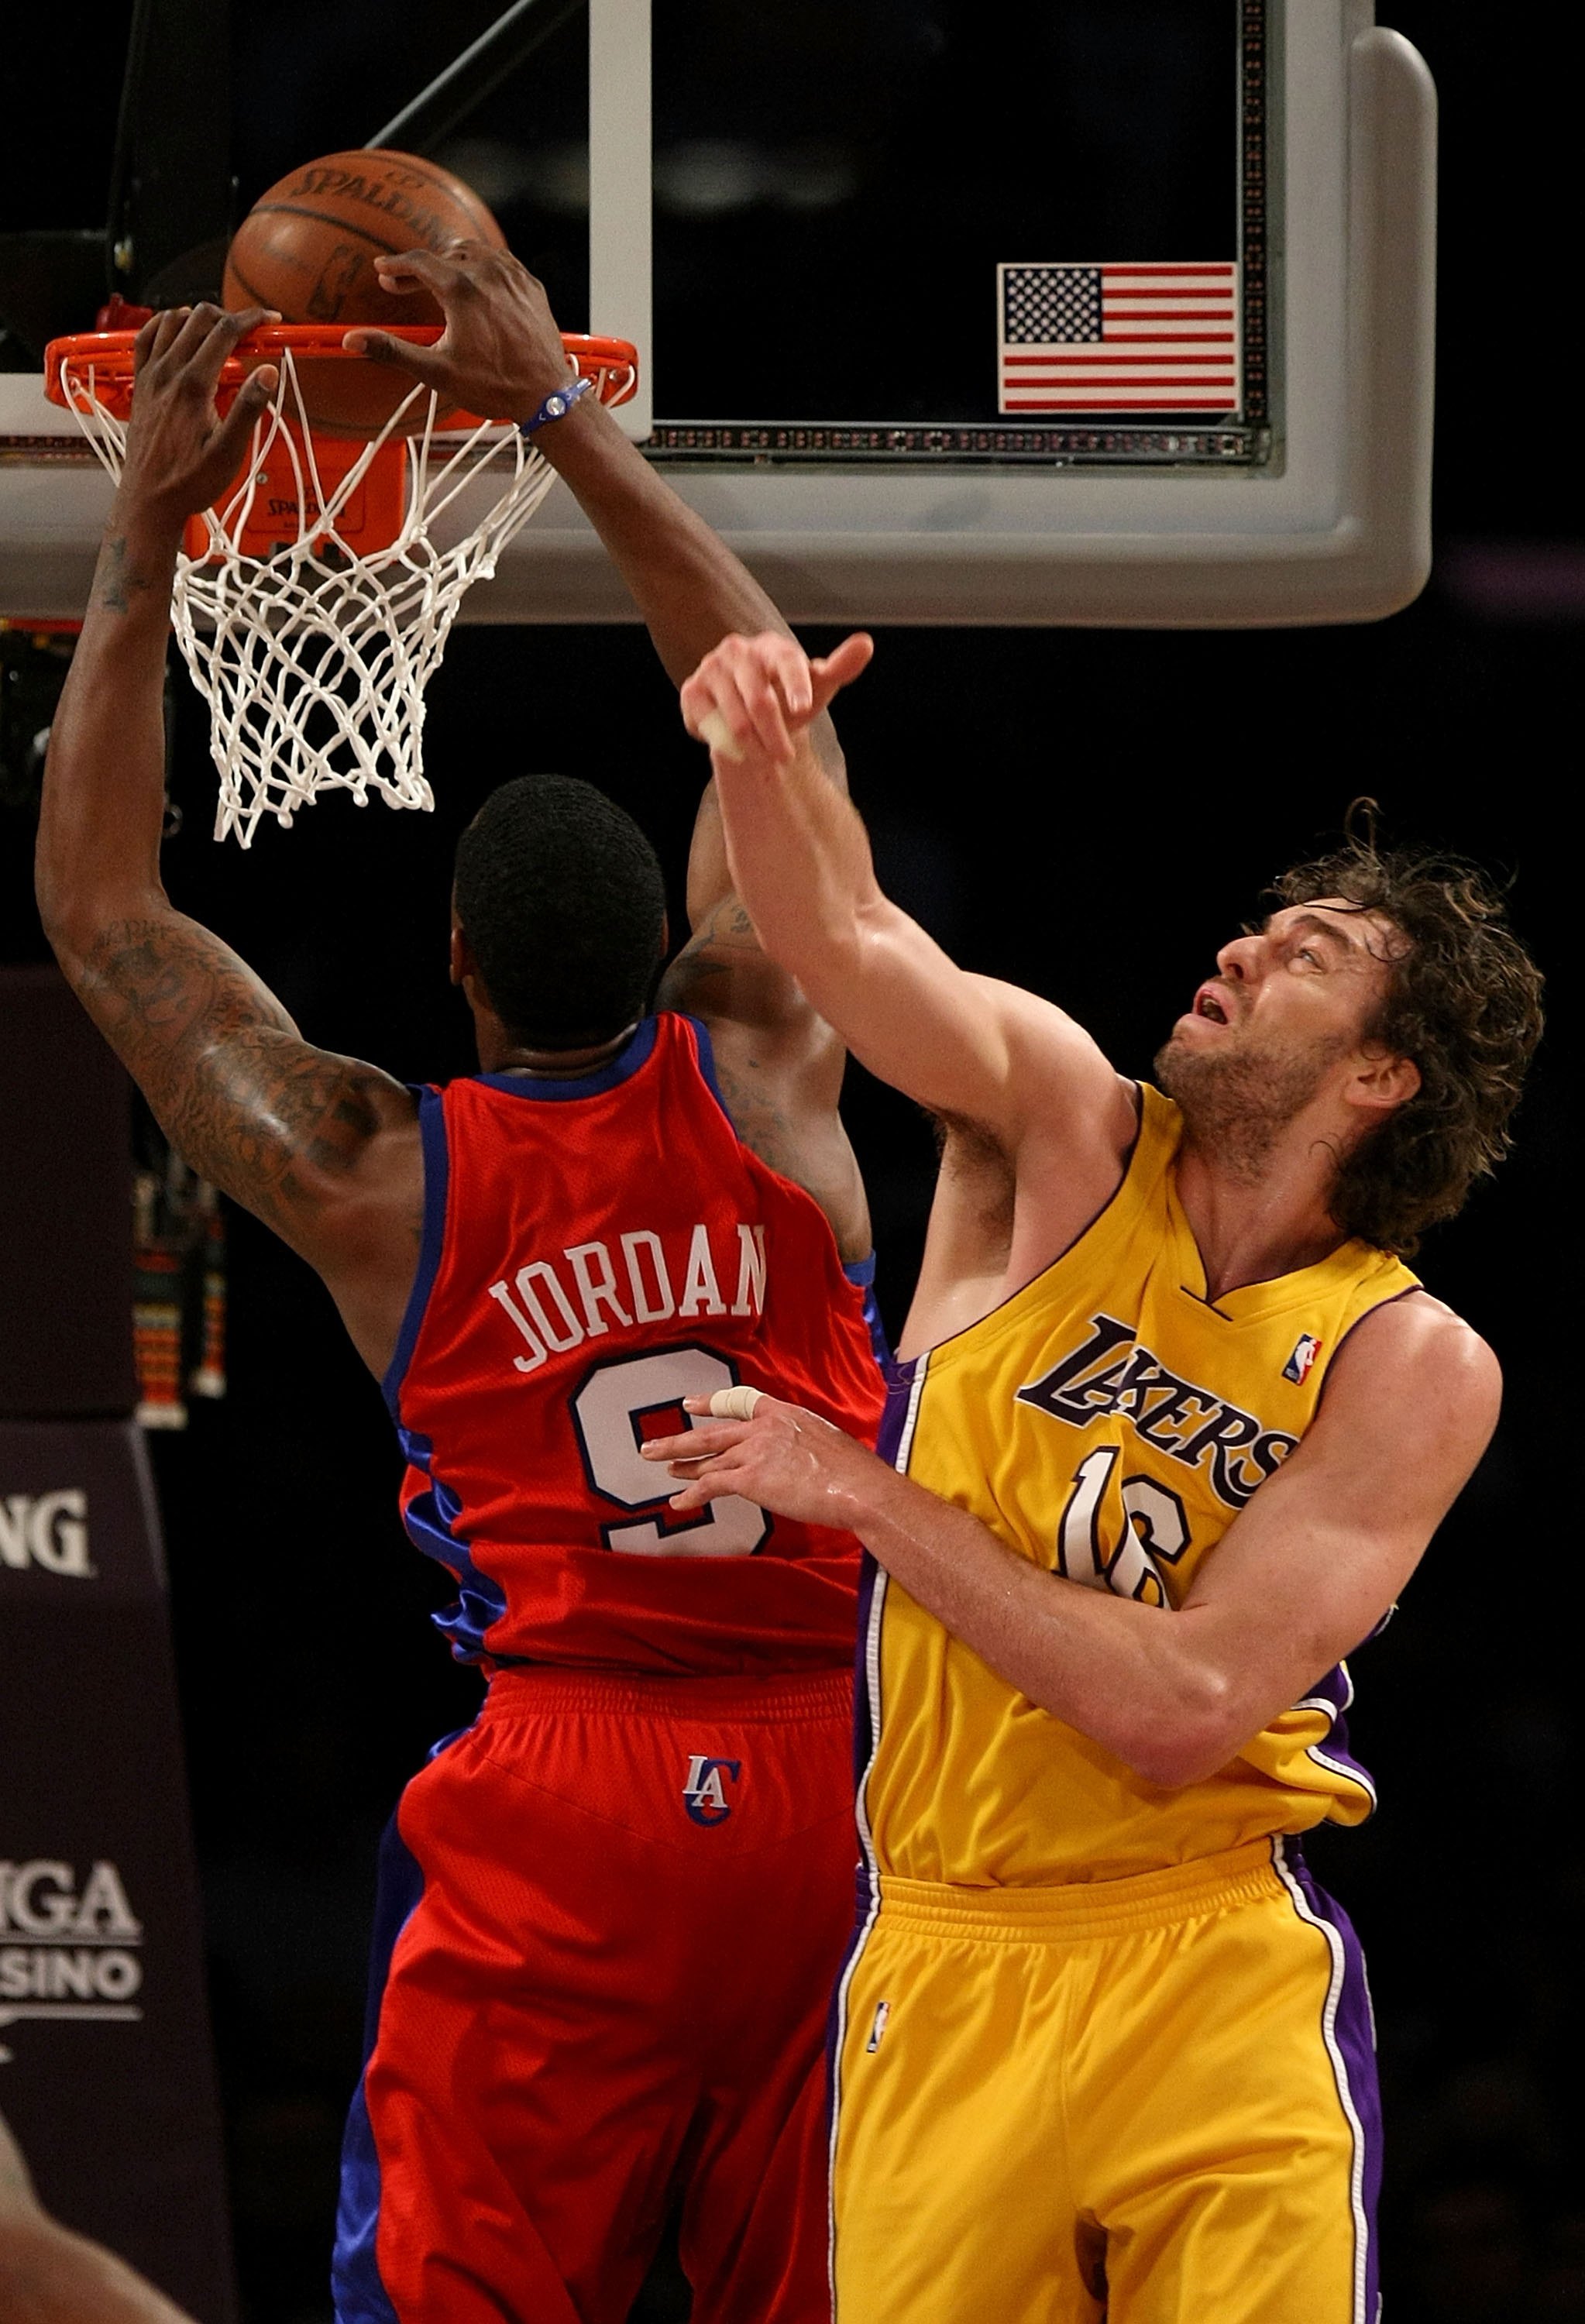 LOS ANGELES, CA - JANUARY 15:  DeAndre Jordan #9 of the Los Angeles Clippers dunks against Pau Gasol #16 of the Los Angeles Lakers during the game on January 15, 2010 at Staples Center in Los Angeles, California. The Lakers won 126-86. NOTE TO USER: User 